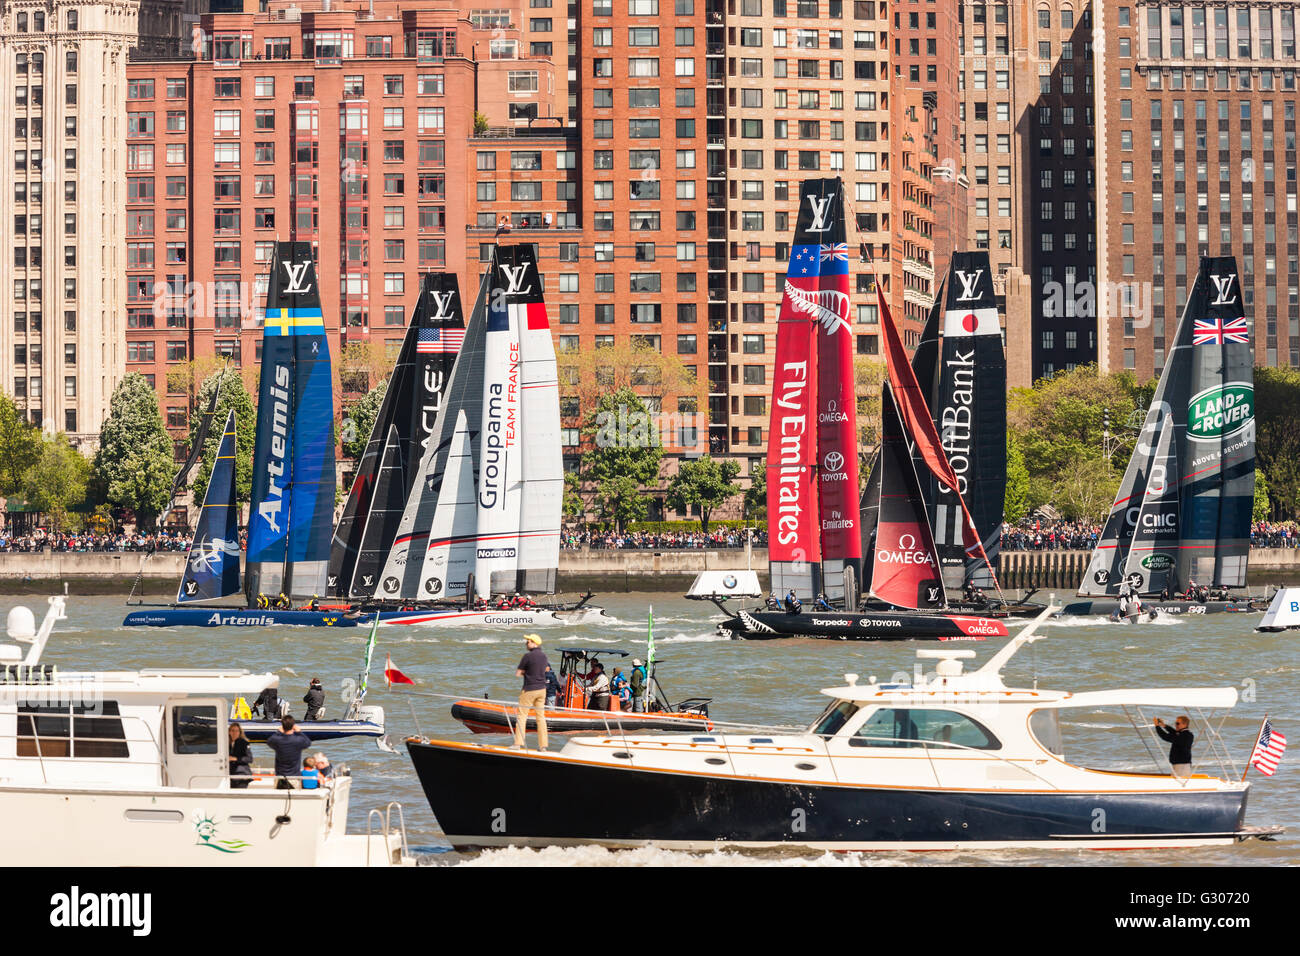 Louis Vuitton America’s Cup World Series team catamarans race on the Hudson River course surrounded by spectator boats. Stock Photo